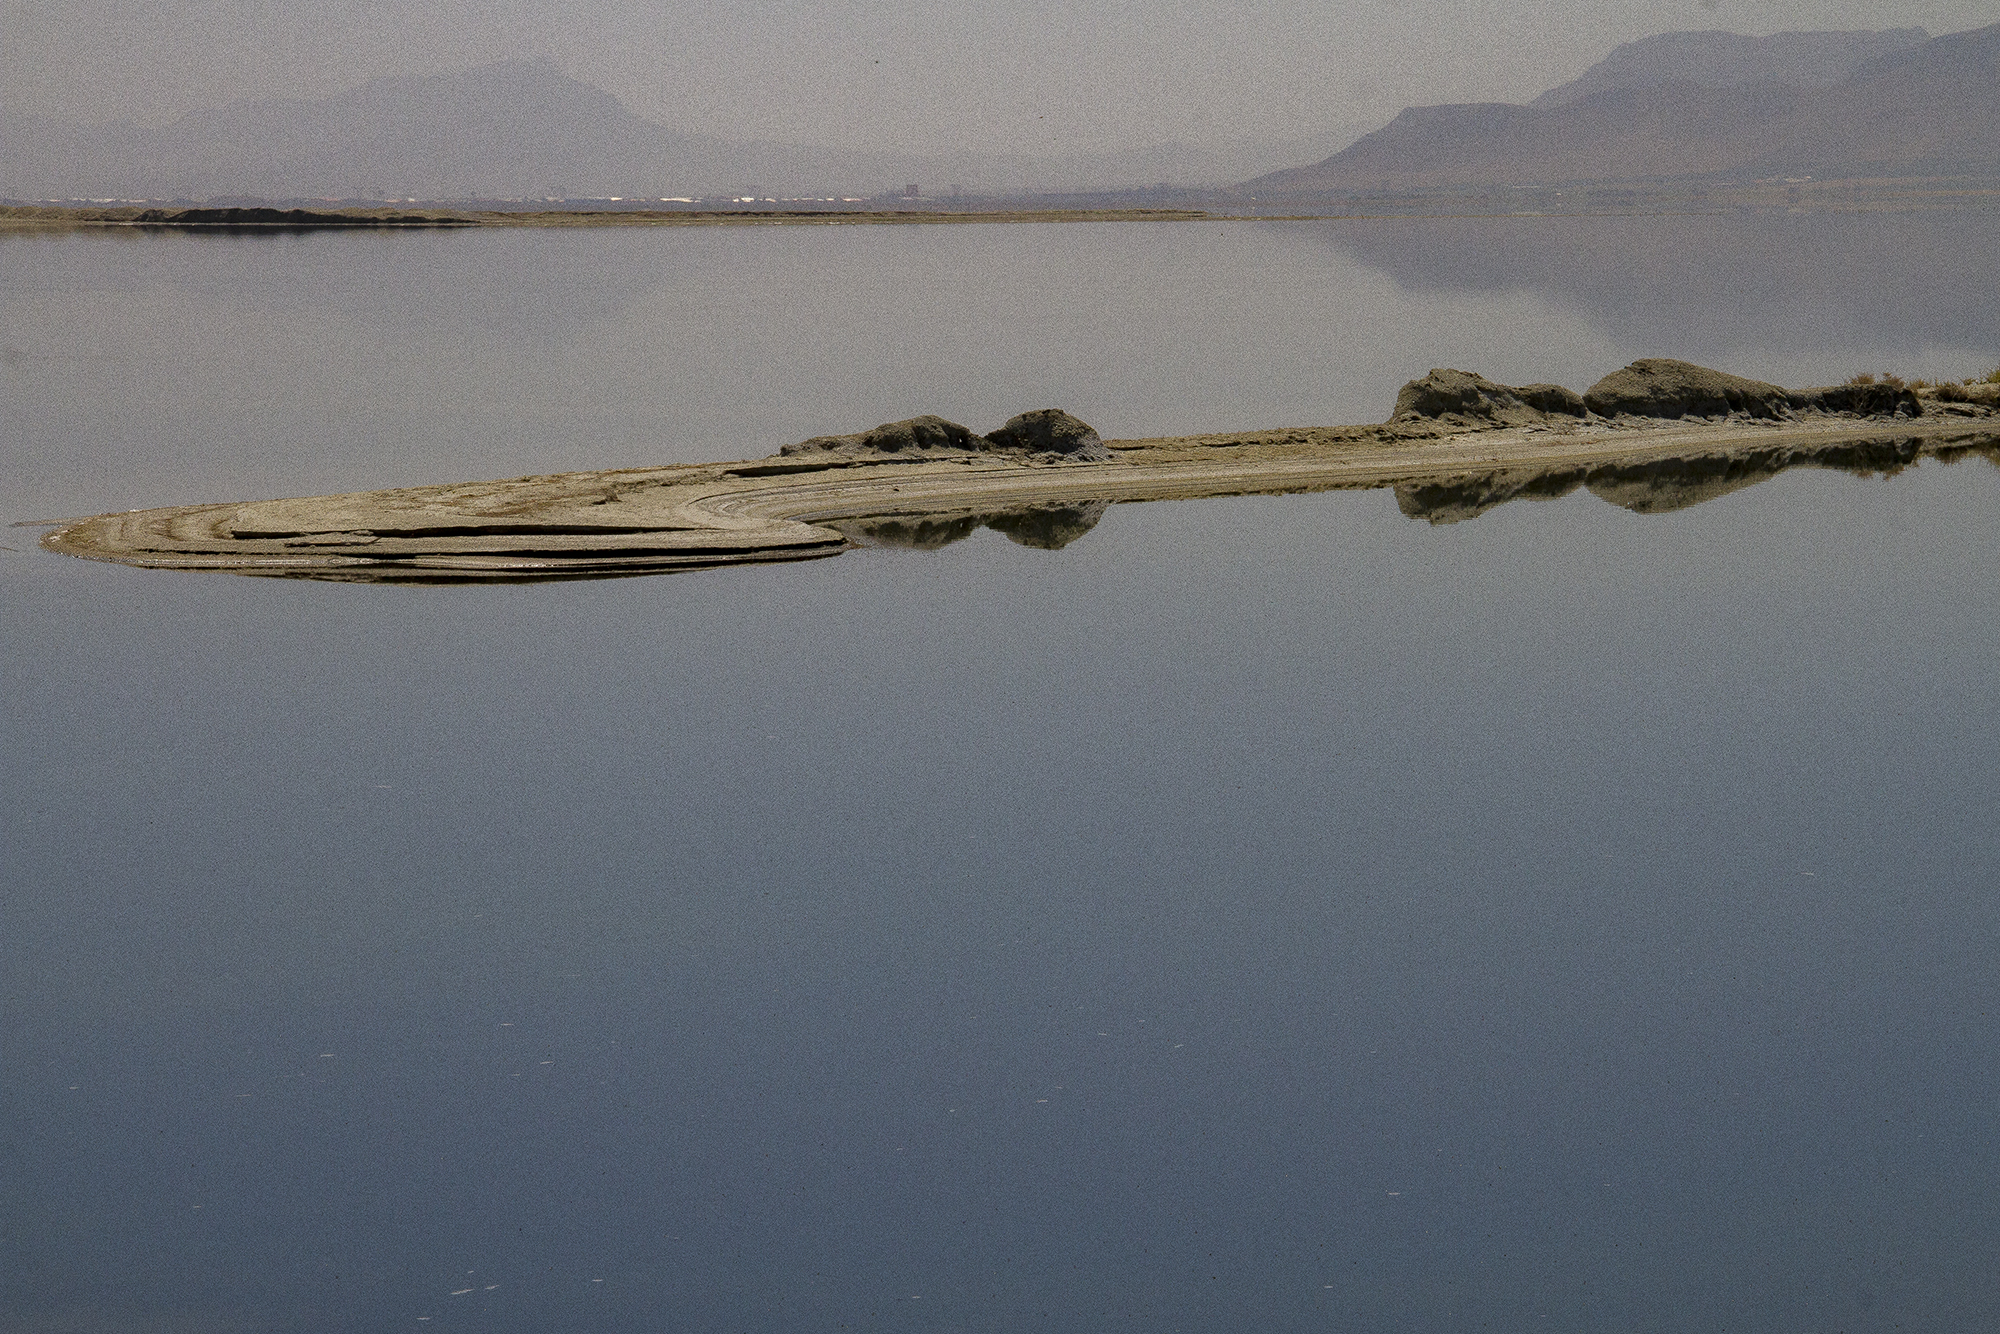 View of a lake, with mountains behind and an island in the middle distance (photo: Qantara)